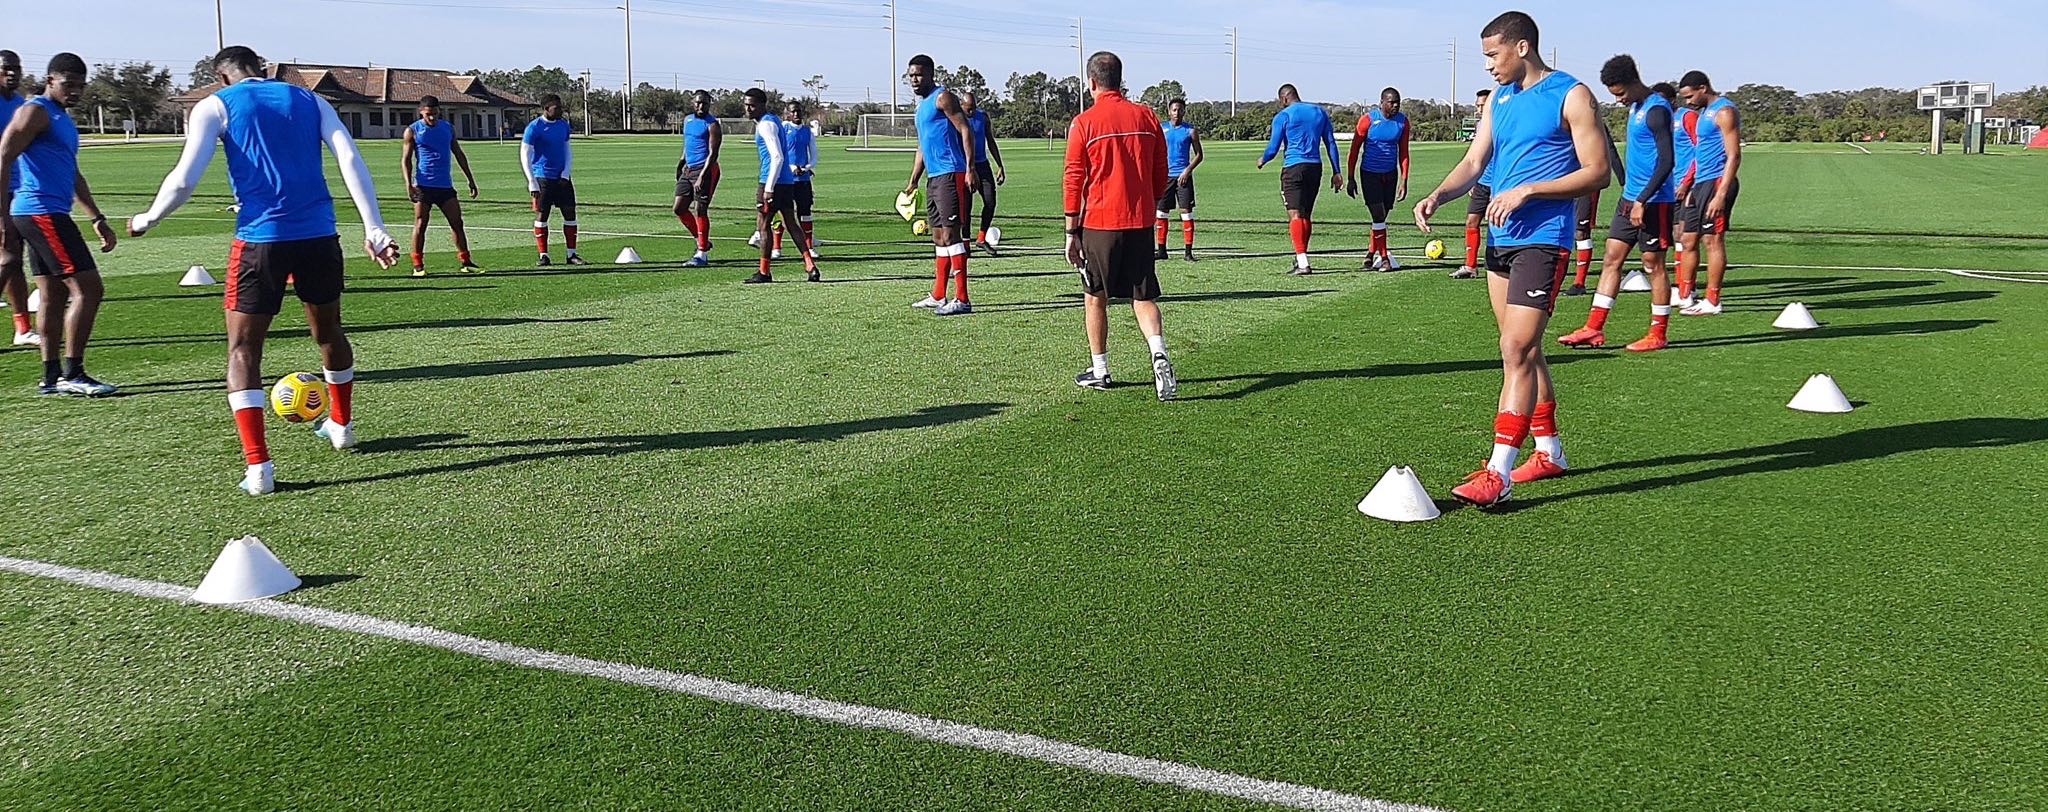 Photo: T&T training in Florida earlier this year.